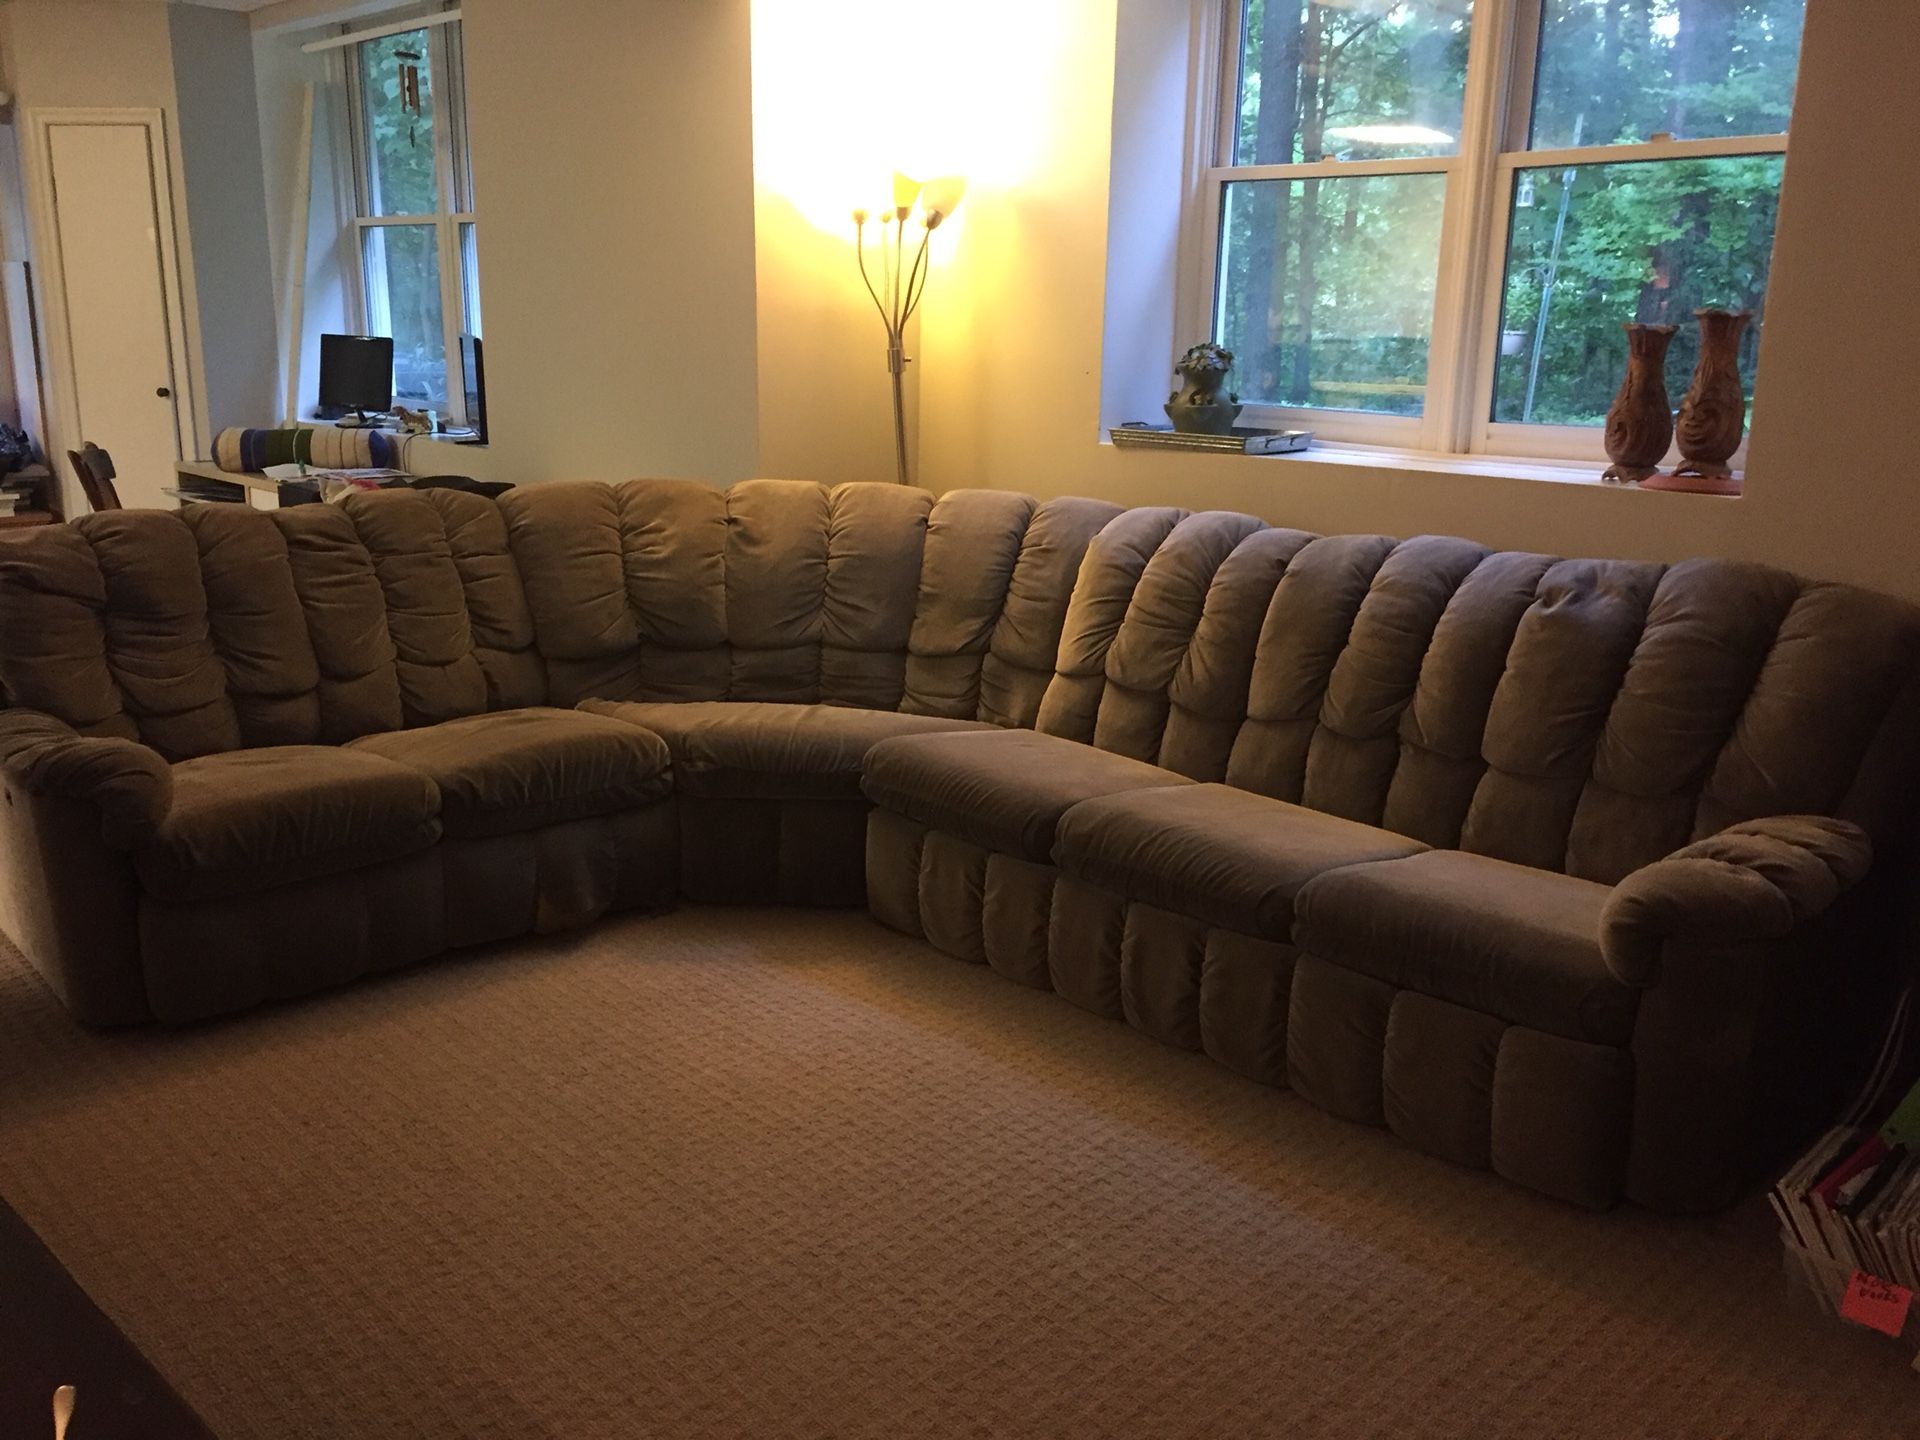 Pending pickup!!! Lazy boy sectional sleeper with recliner